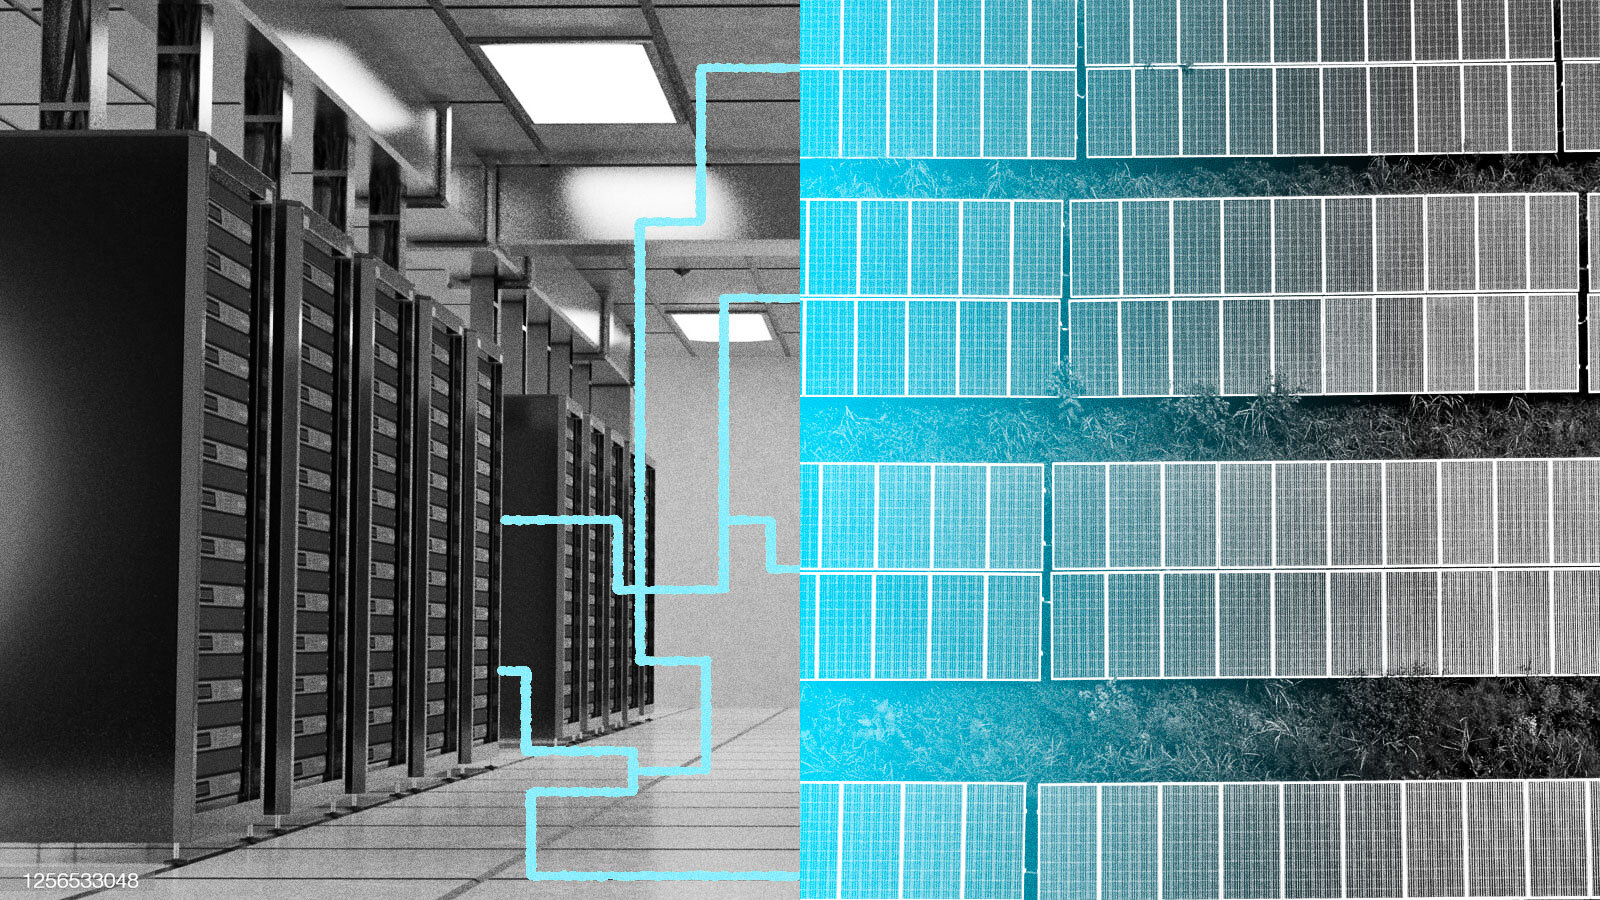 How data centers could help power the grid